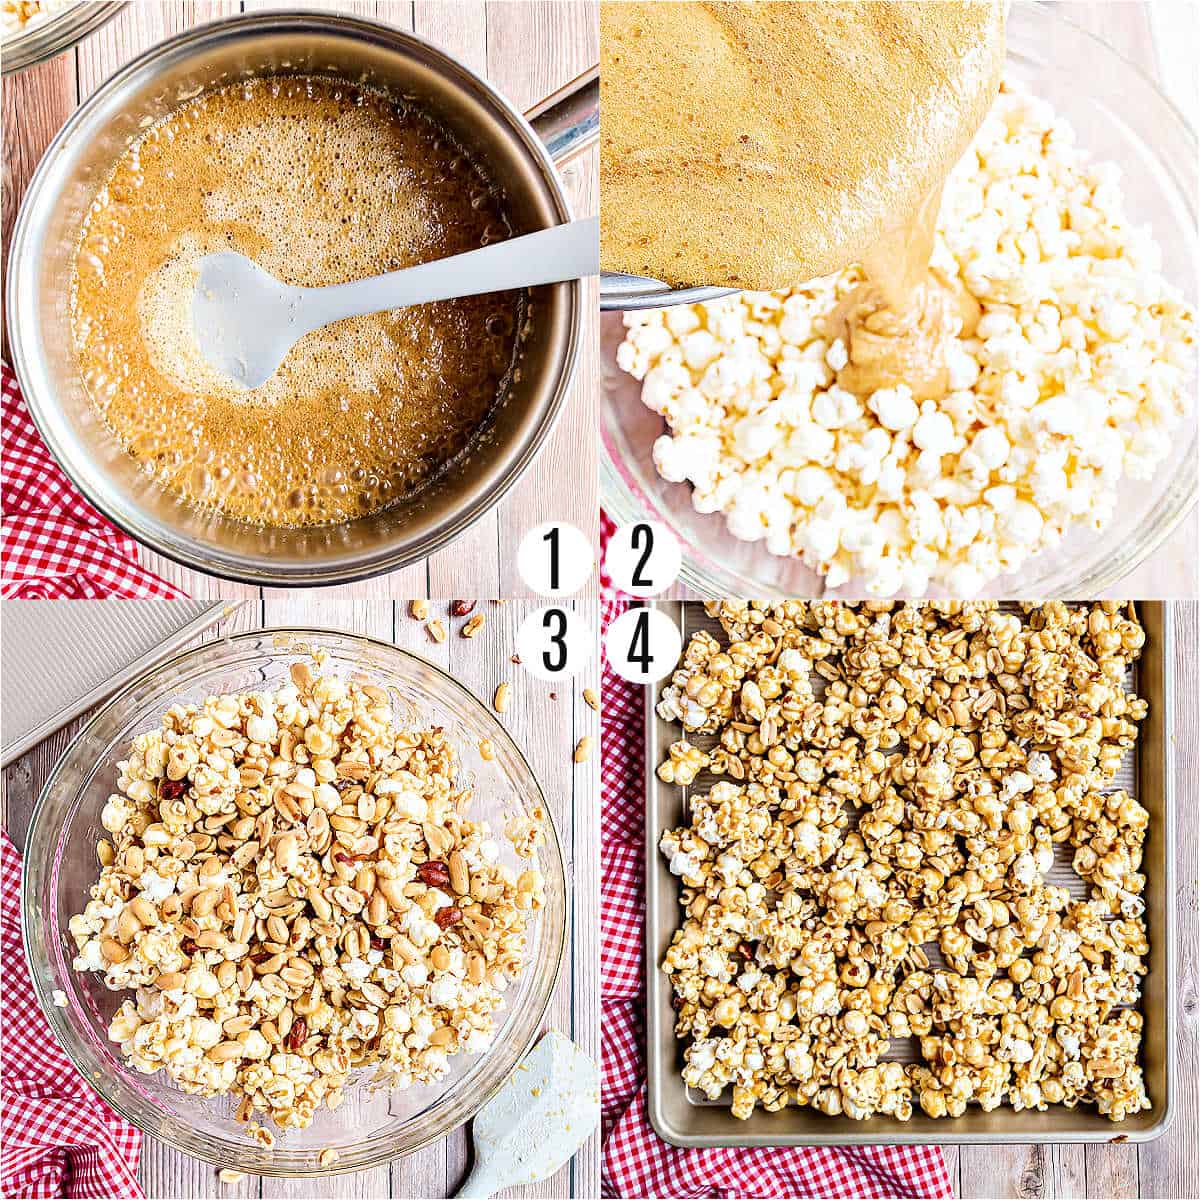 Step by step photos showing how to make cracker jack.